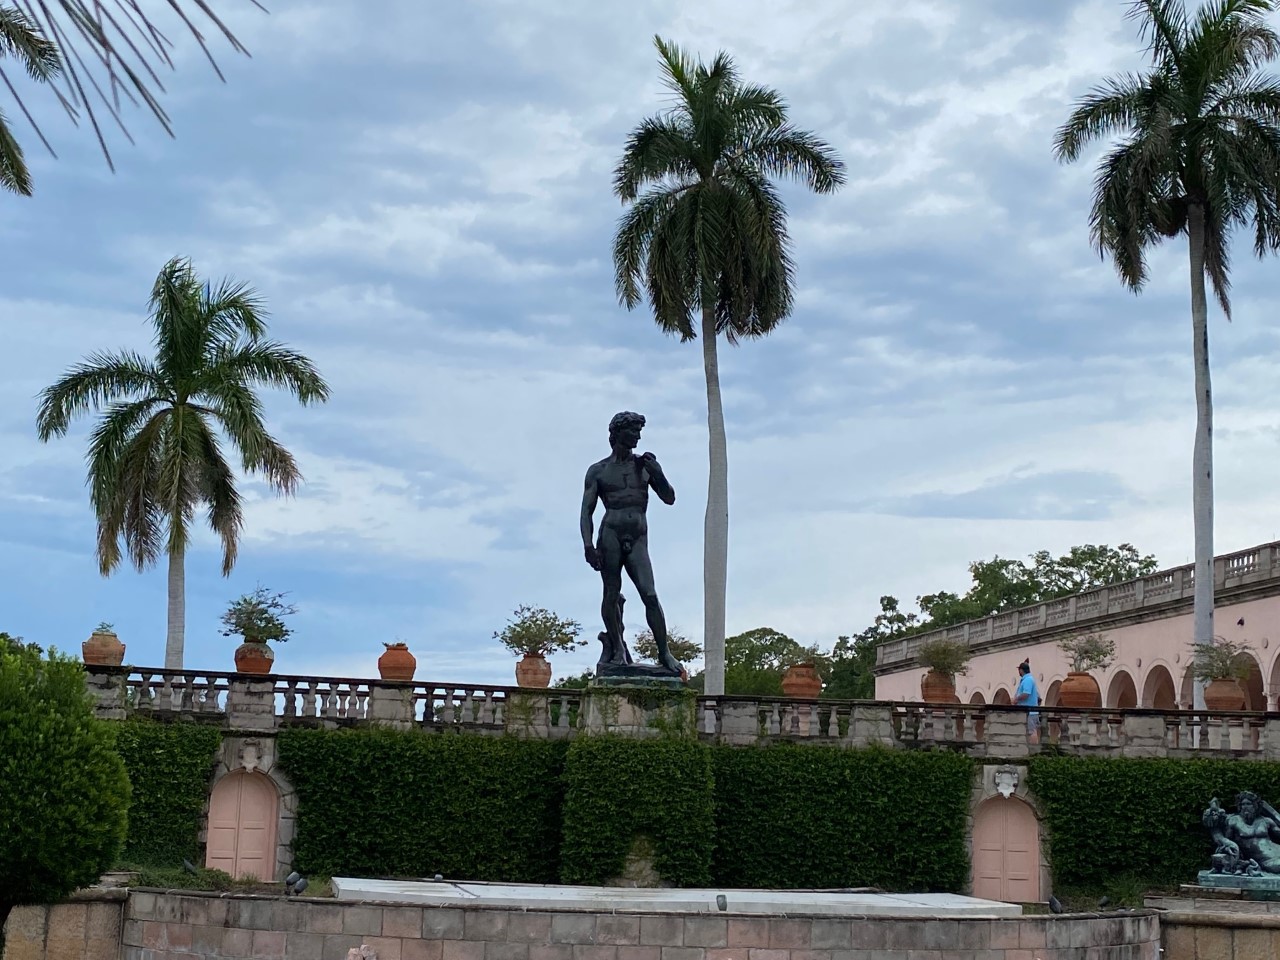 Ringling Museum of Art statue of David in the Courtyard.